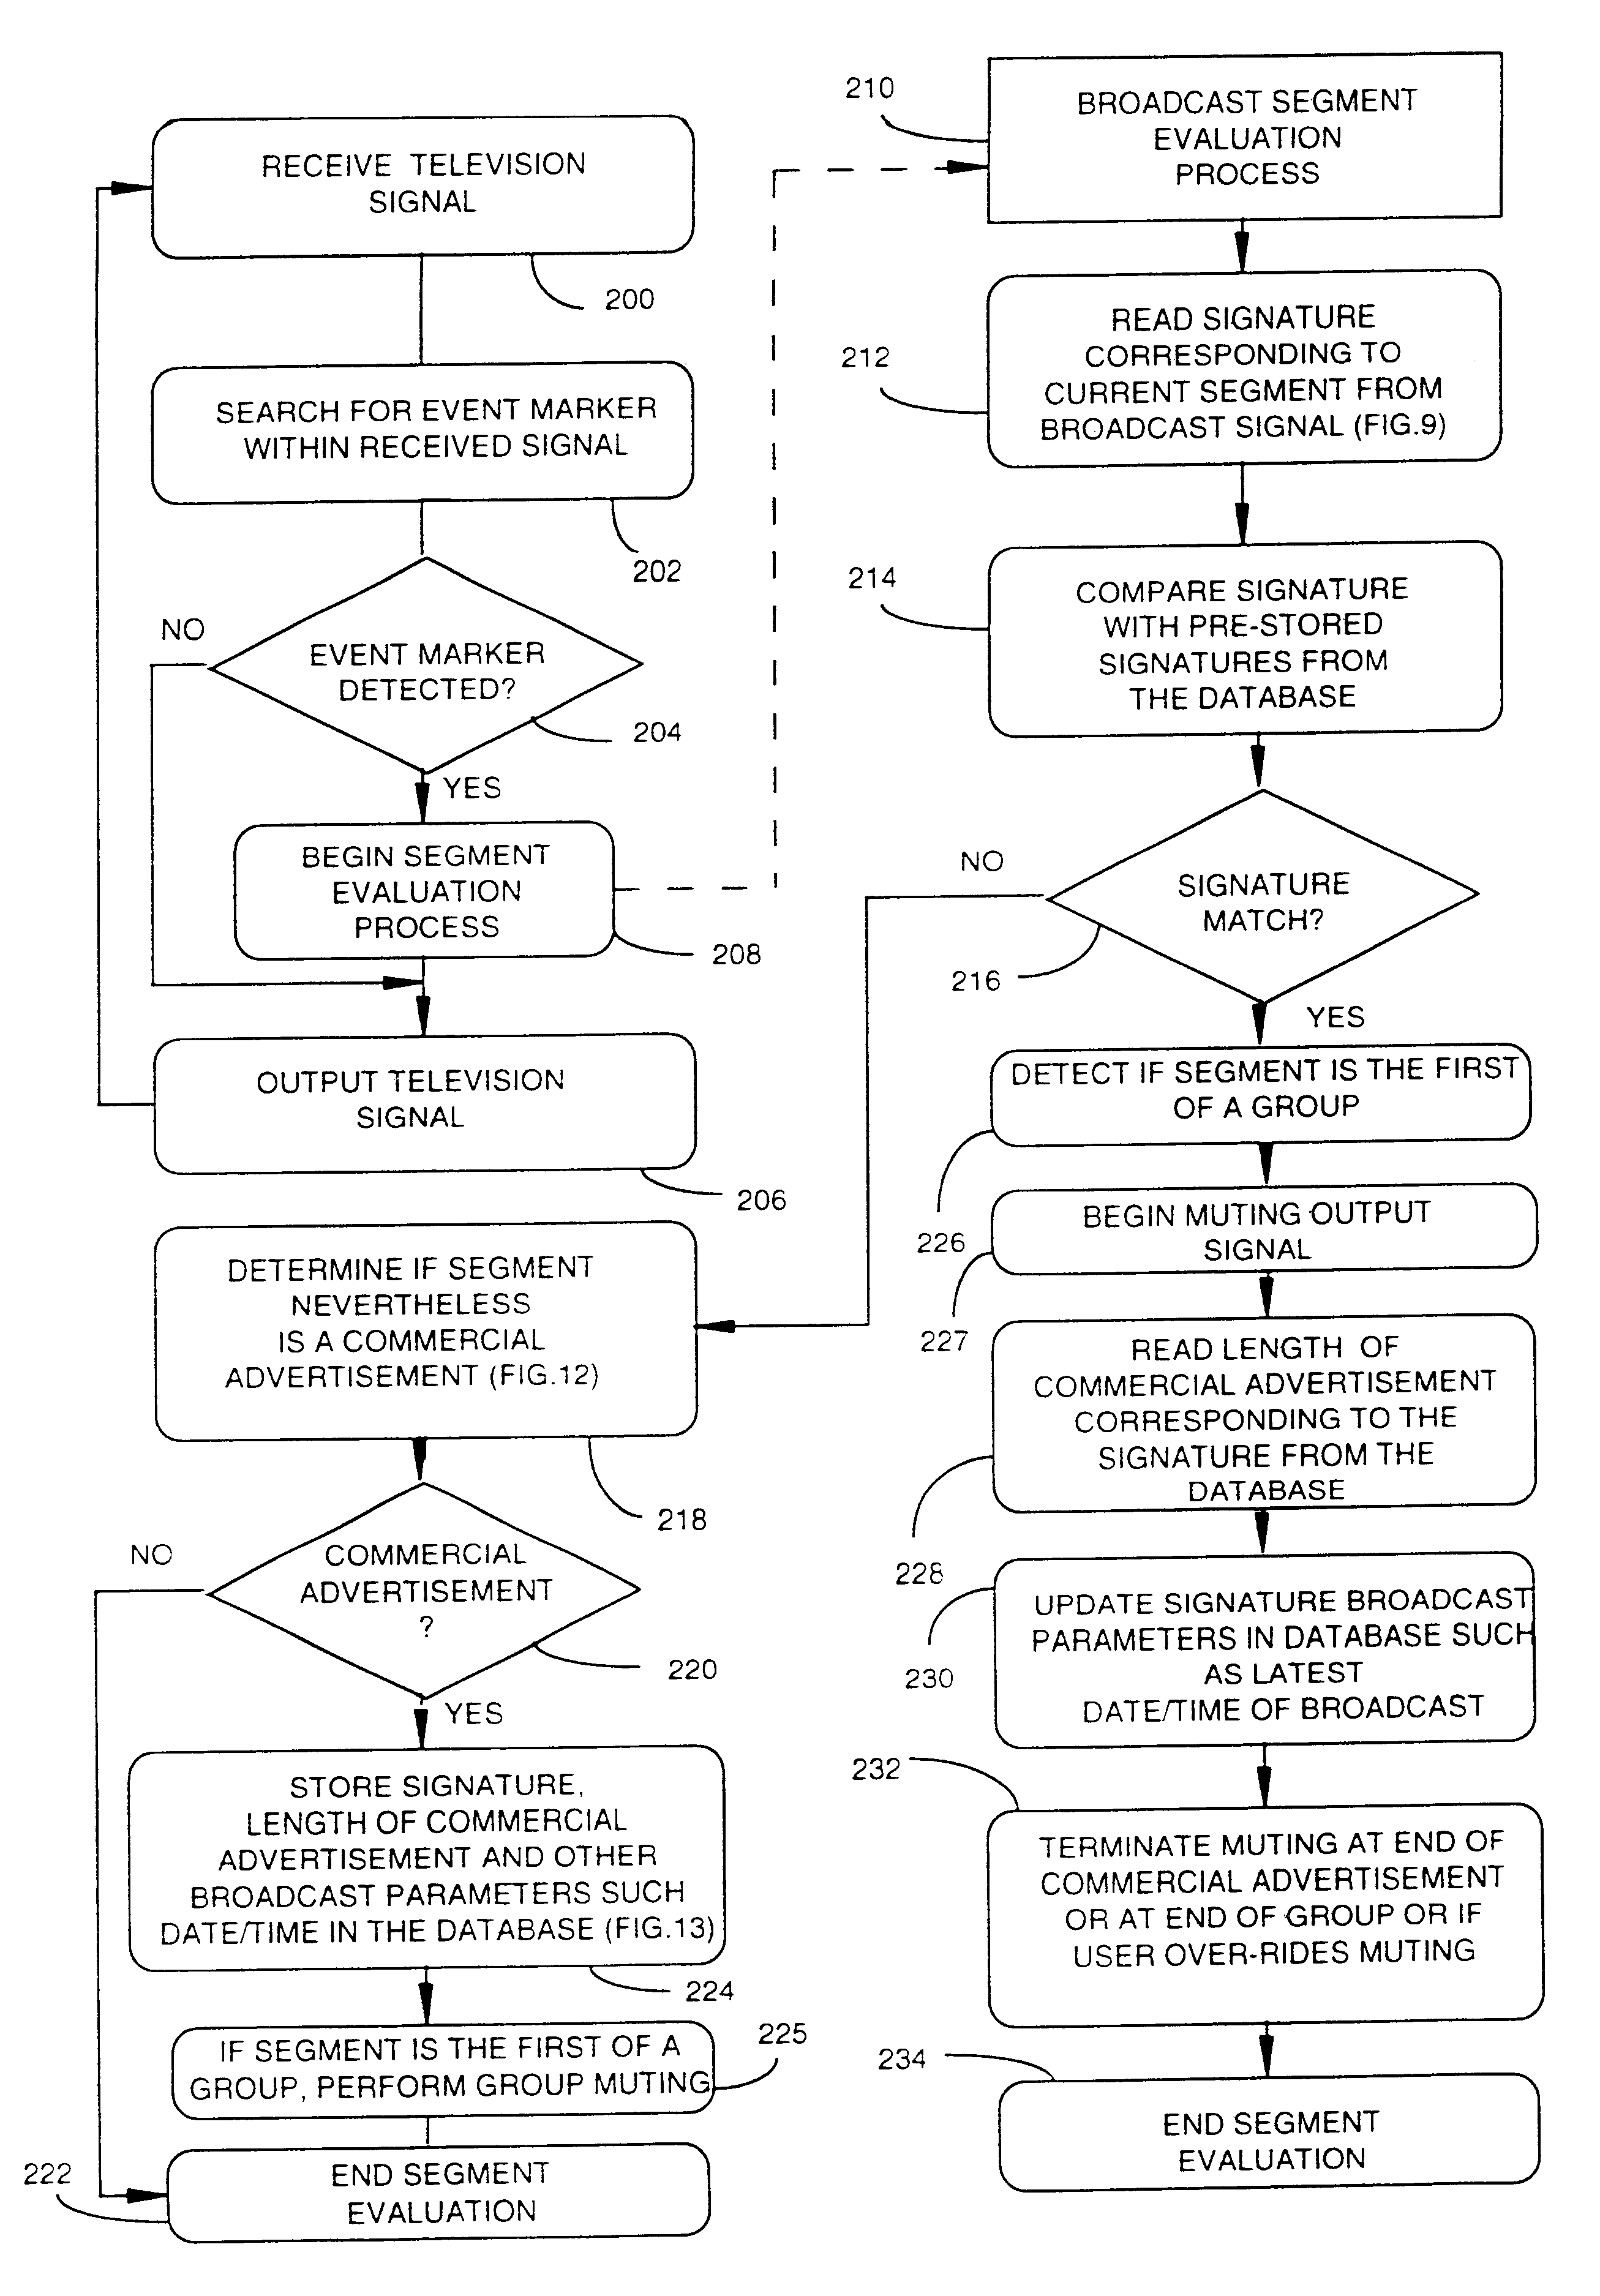 Method and apparatus for controlling a videotape recorder in real-time to automatically identify and selectively skip segments of a television broadcast signal during recording of the television signal